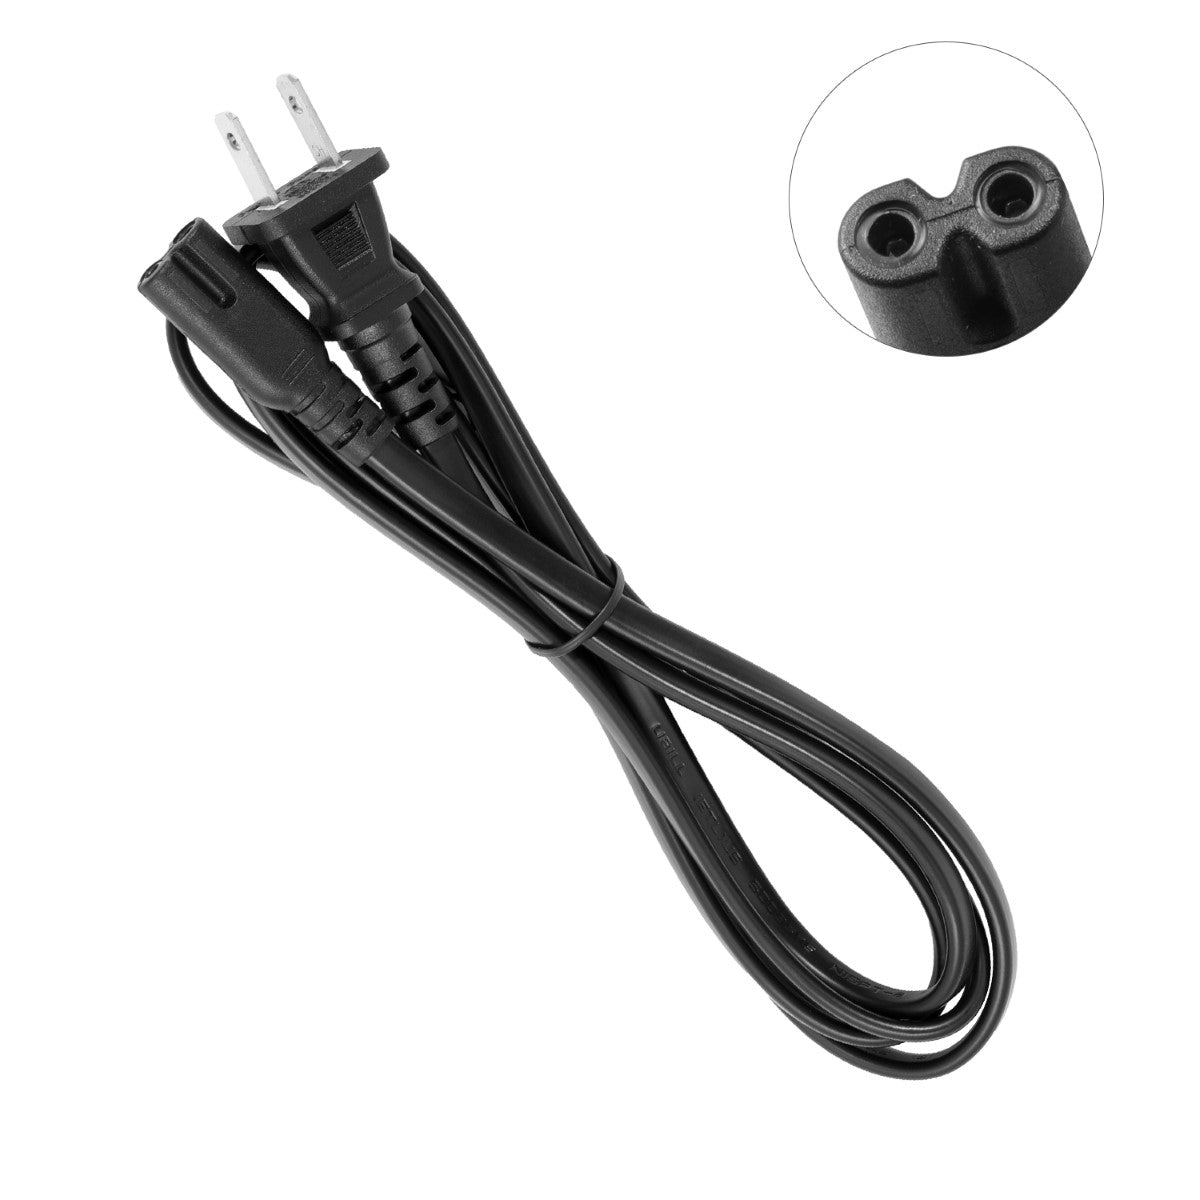 Power Cable for HP Officejet Pro 6962 Printer.